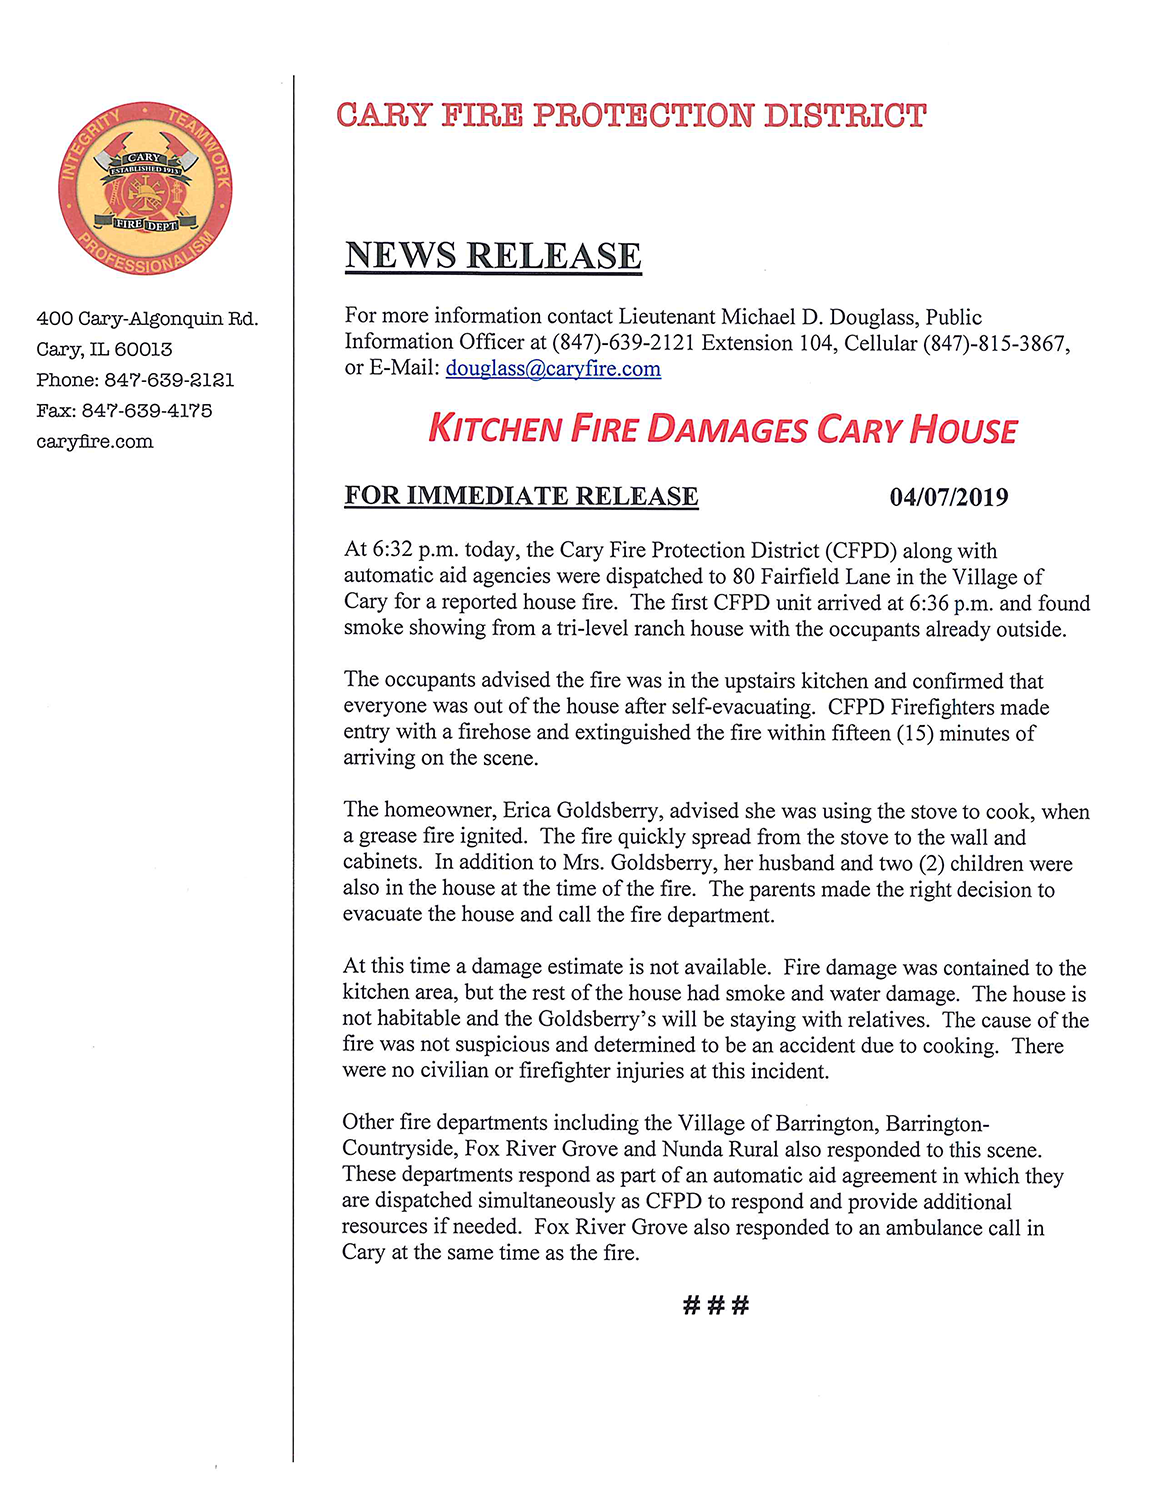 Cary Fire Department press release